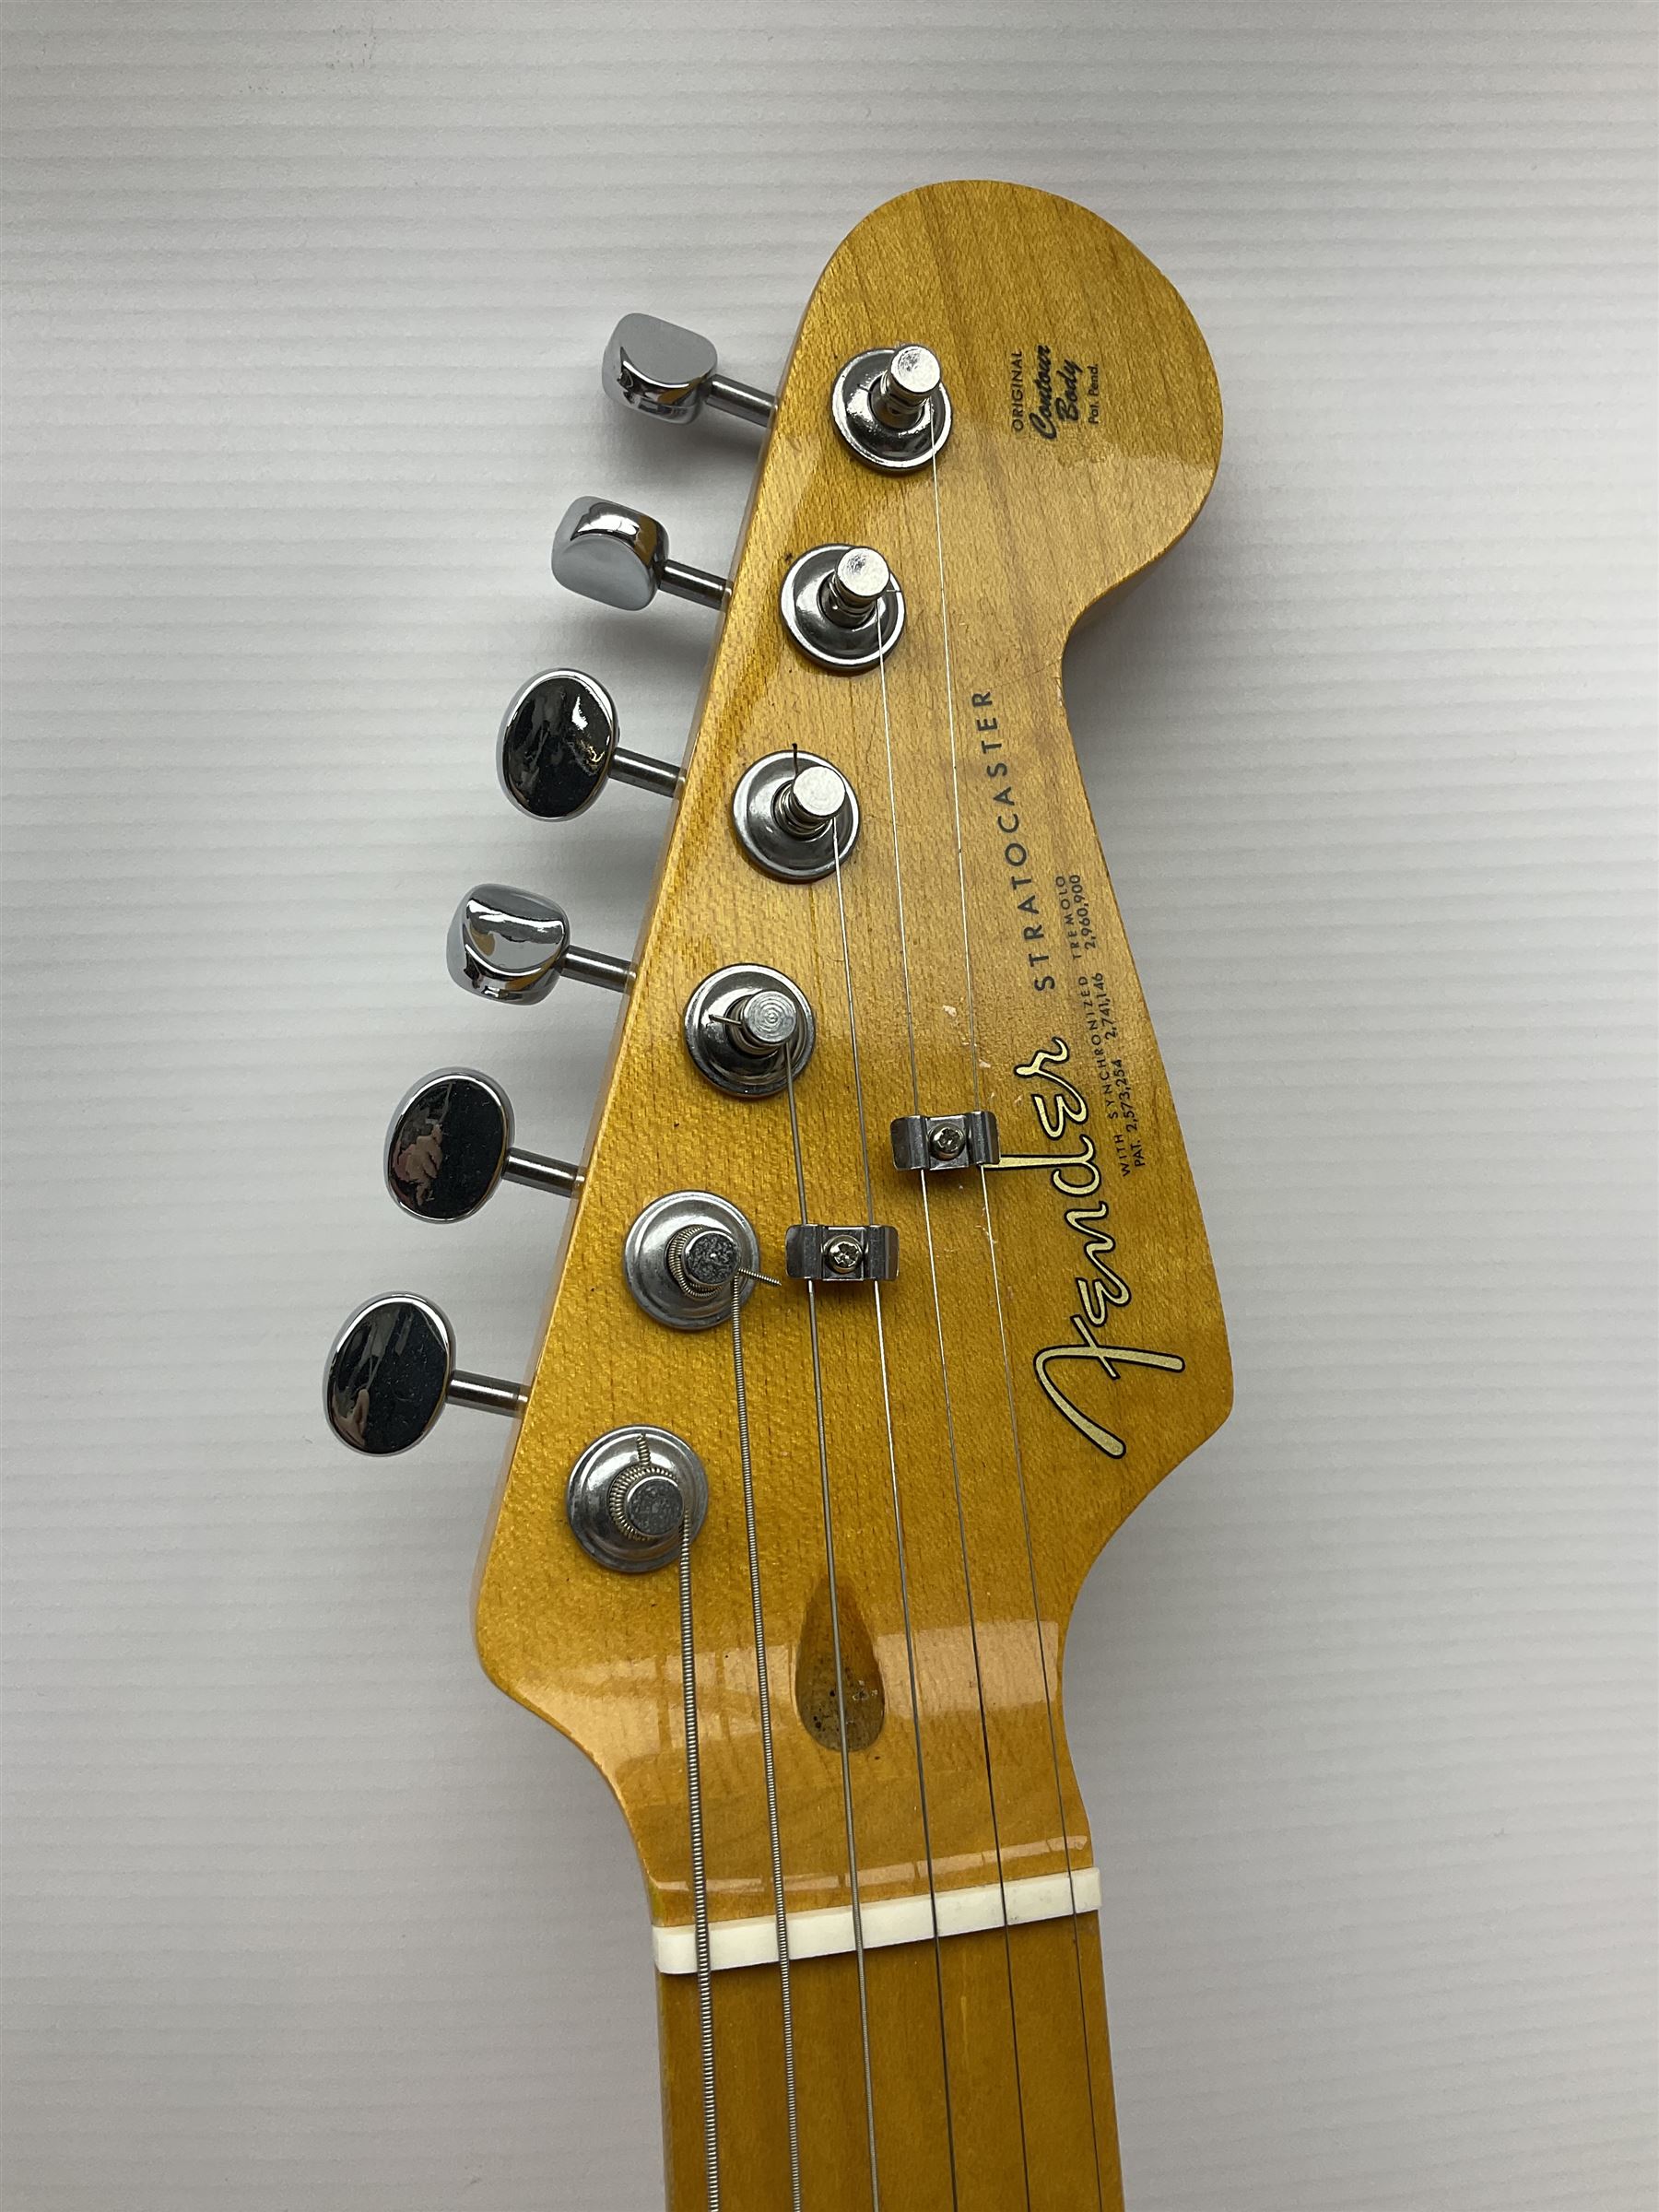 Fender Stratocaster copy electric guitar with natural two-piece ash body - Image 2 of 17